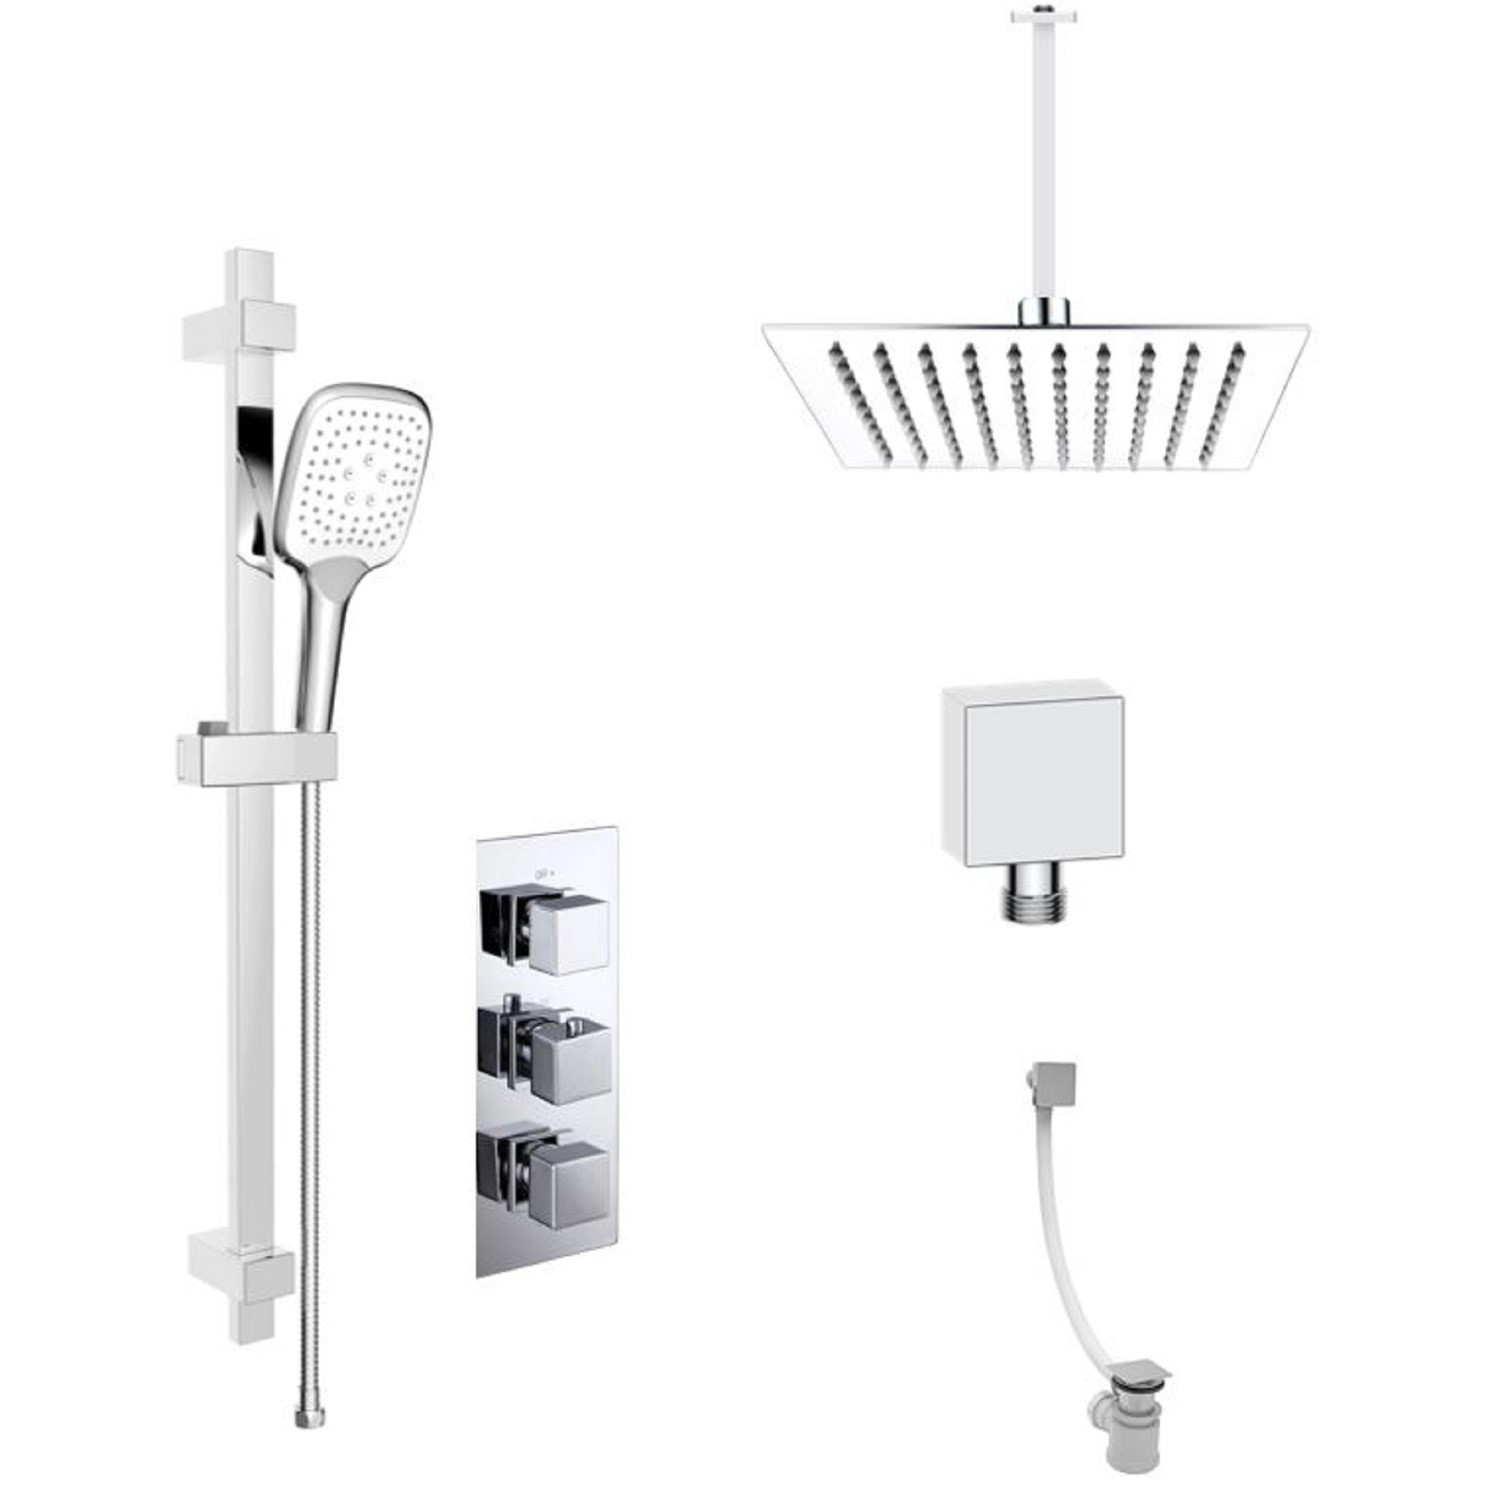 Concealed Thermostatic Mixer Shower with Slim Rainfall Overhead Handset & Bath Filler - Cube